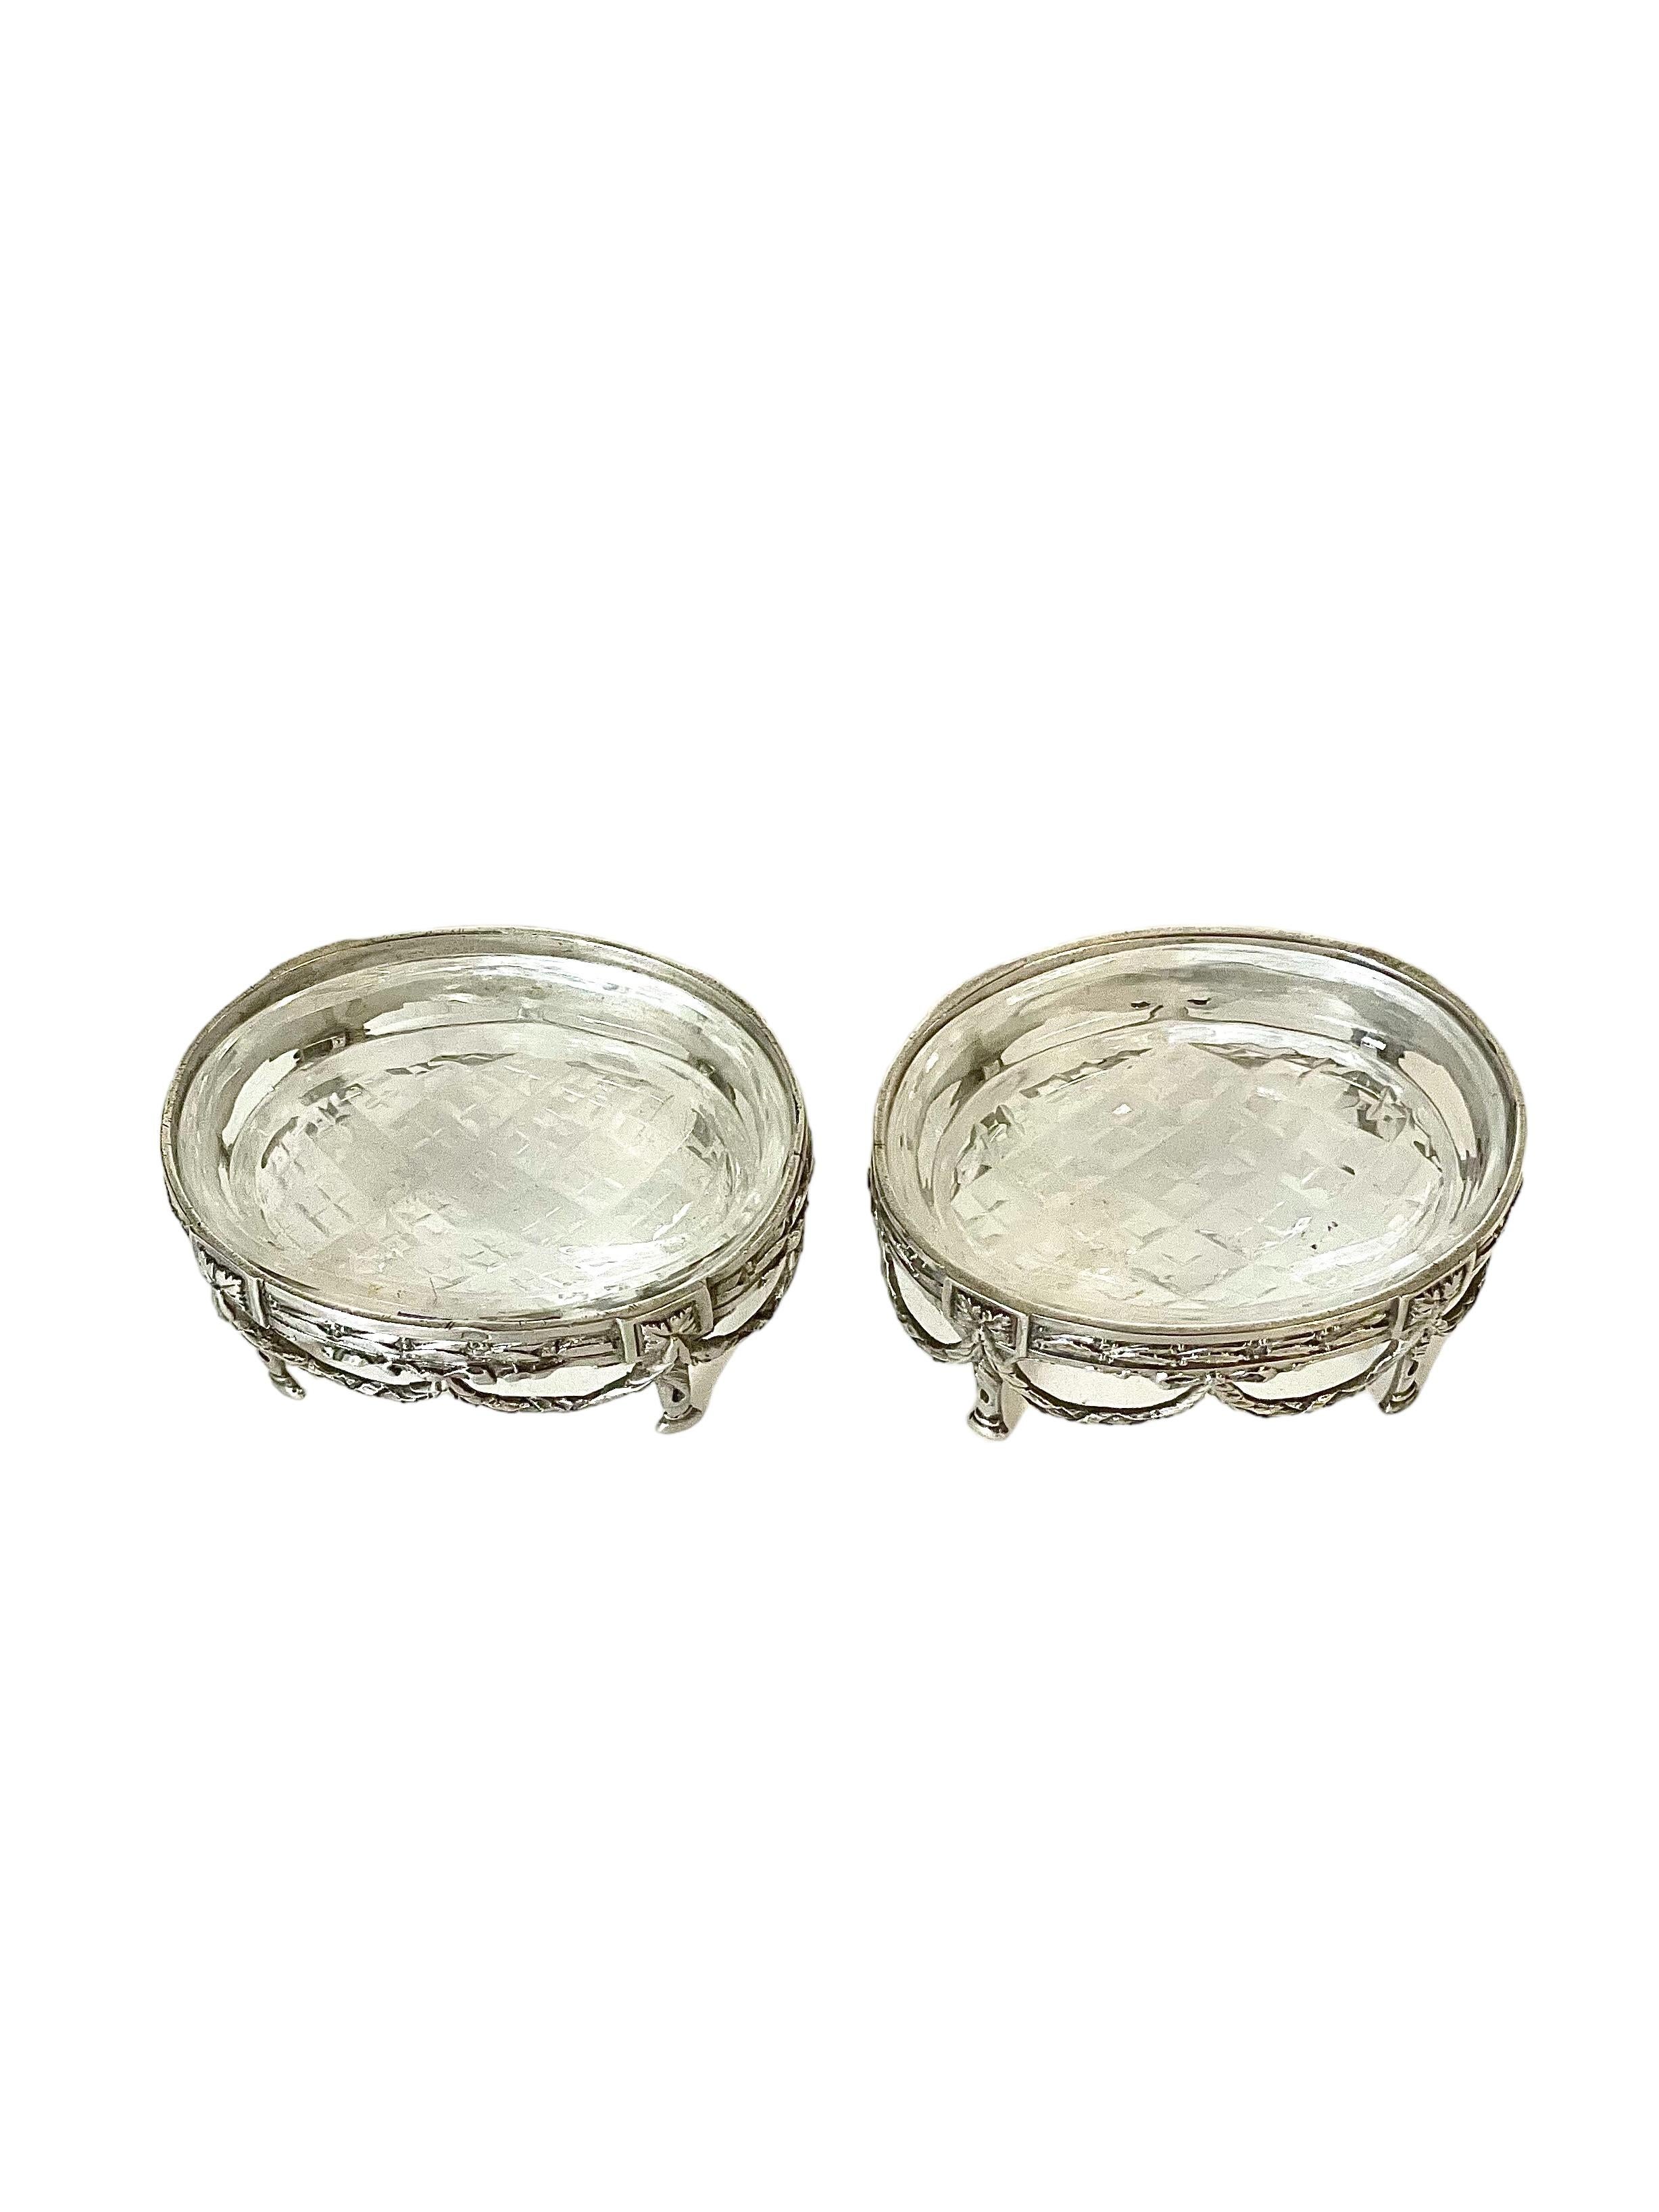 An exquisite pair of Louis XVI-style cauldron-shaped, sterling silver salt cellars, finely decorated with swags and motifs of asparagus and laurel wreaths. 
Dating from around the turn of the 20th century, these feature removable white crystal